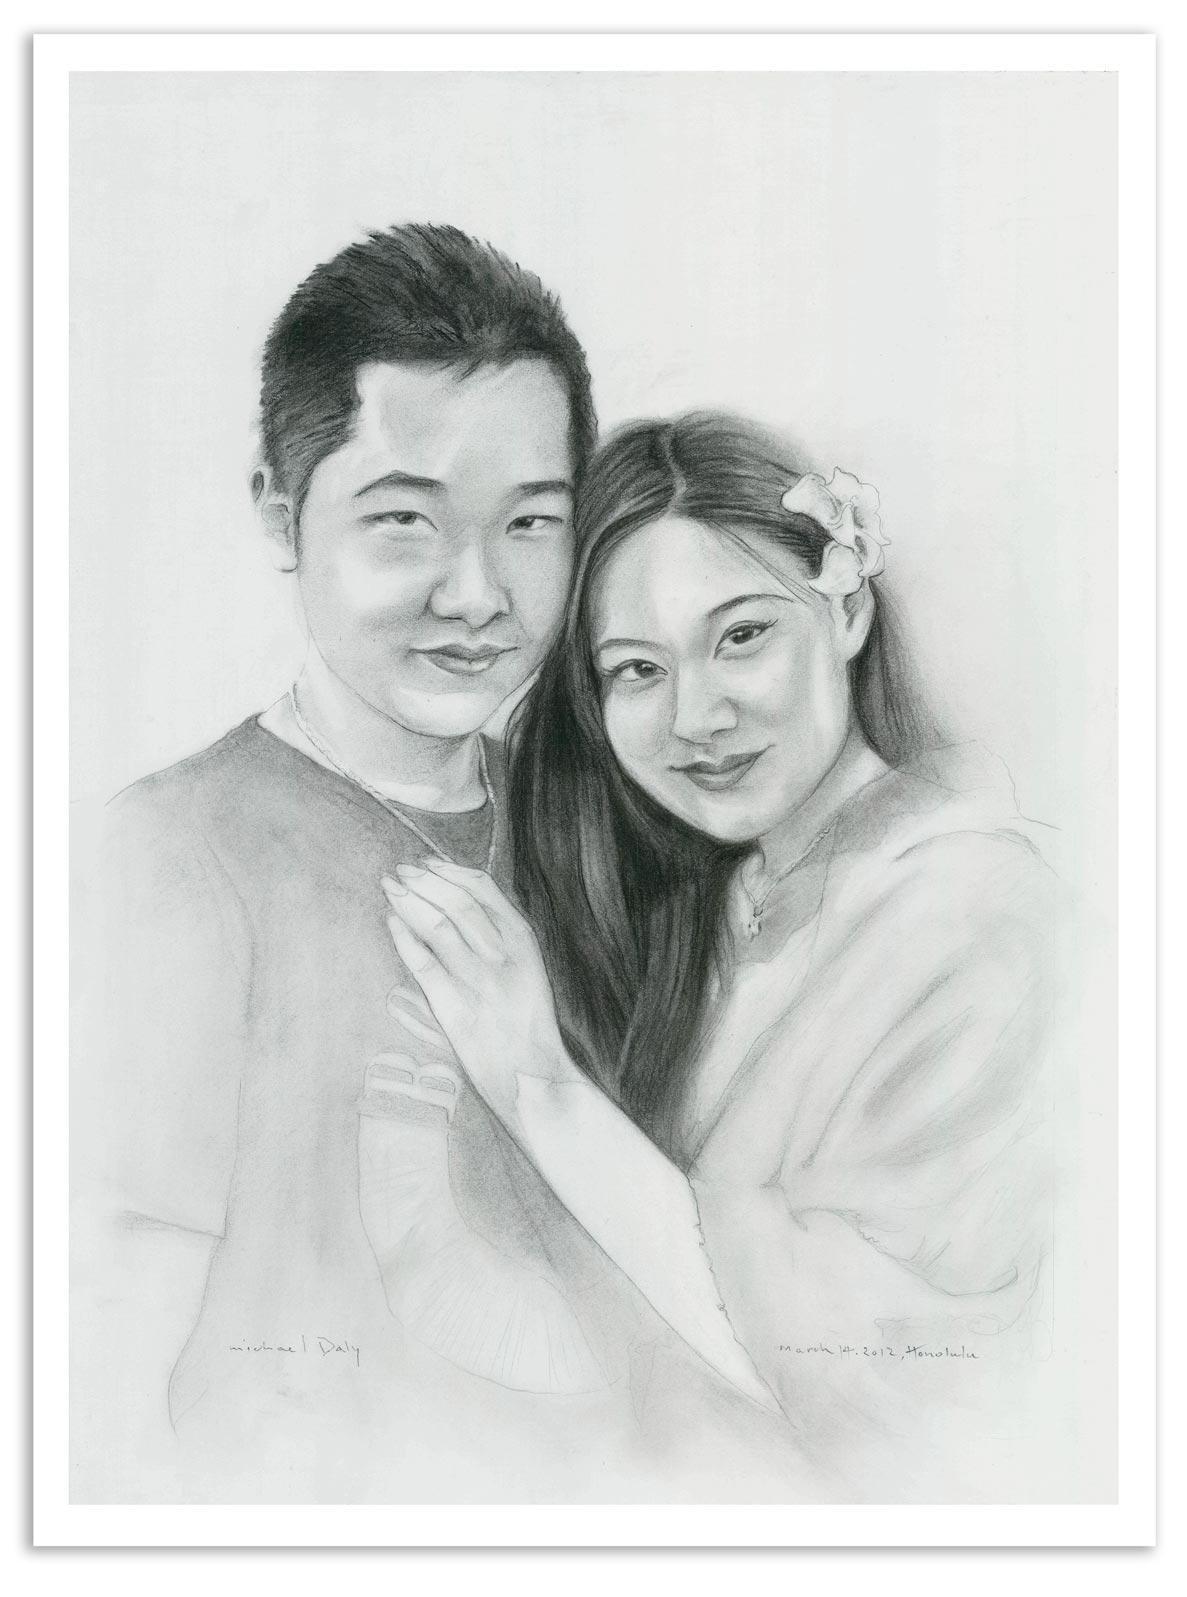 Tan and Mina, Chinese Couple Art Portrait by Michael Daly Artist in Waikiki Honolulu Hawaii. Charcoal on paper, 2012, 23.5 x17"